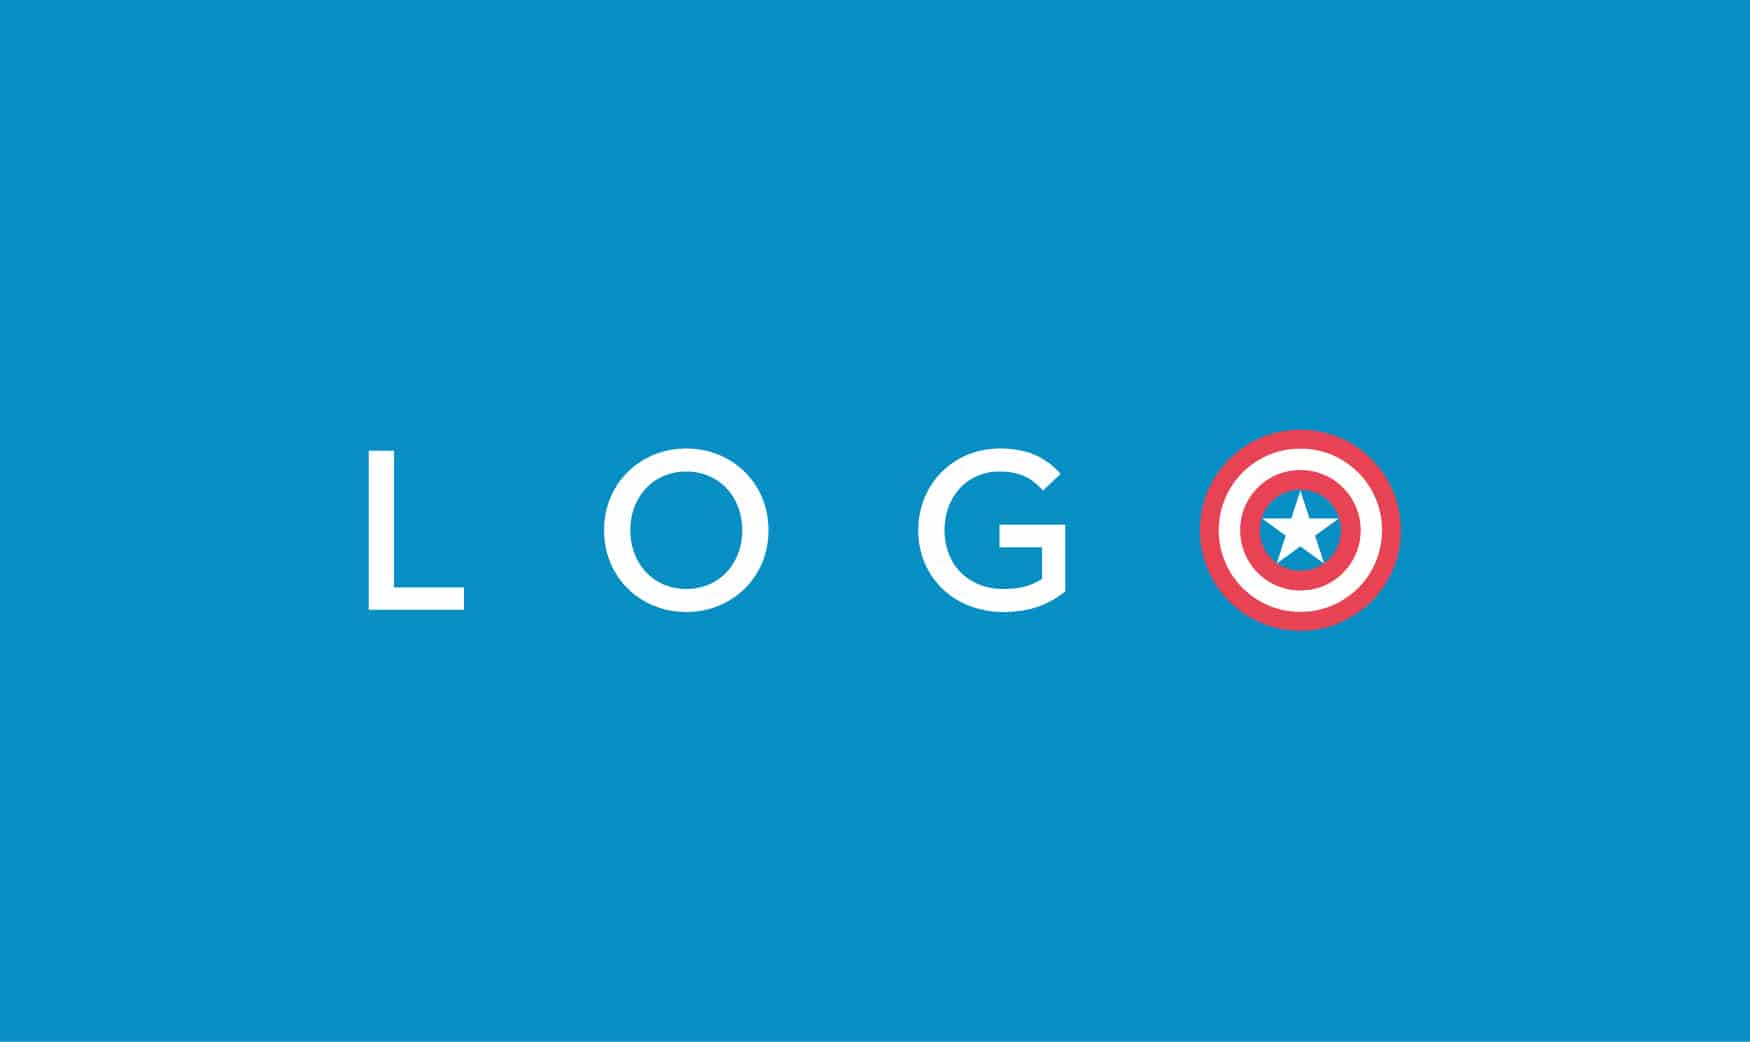 Superhero Logo design: How to give your brand superpowers